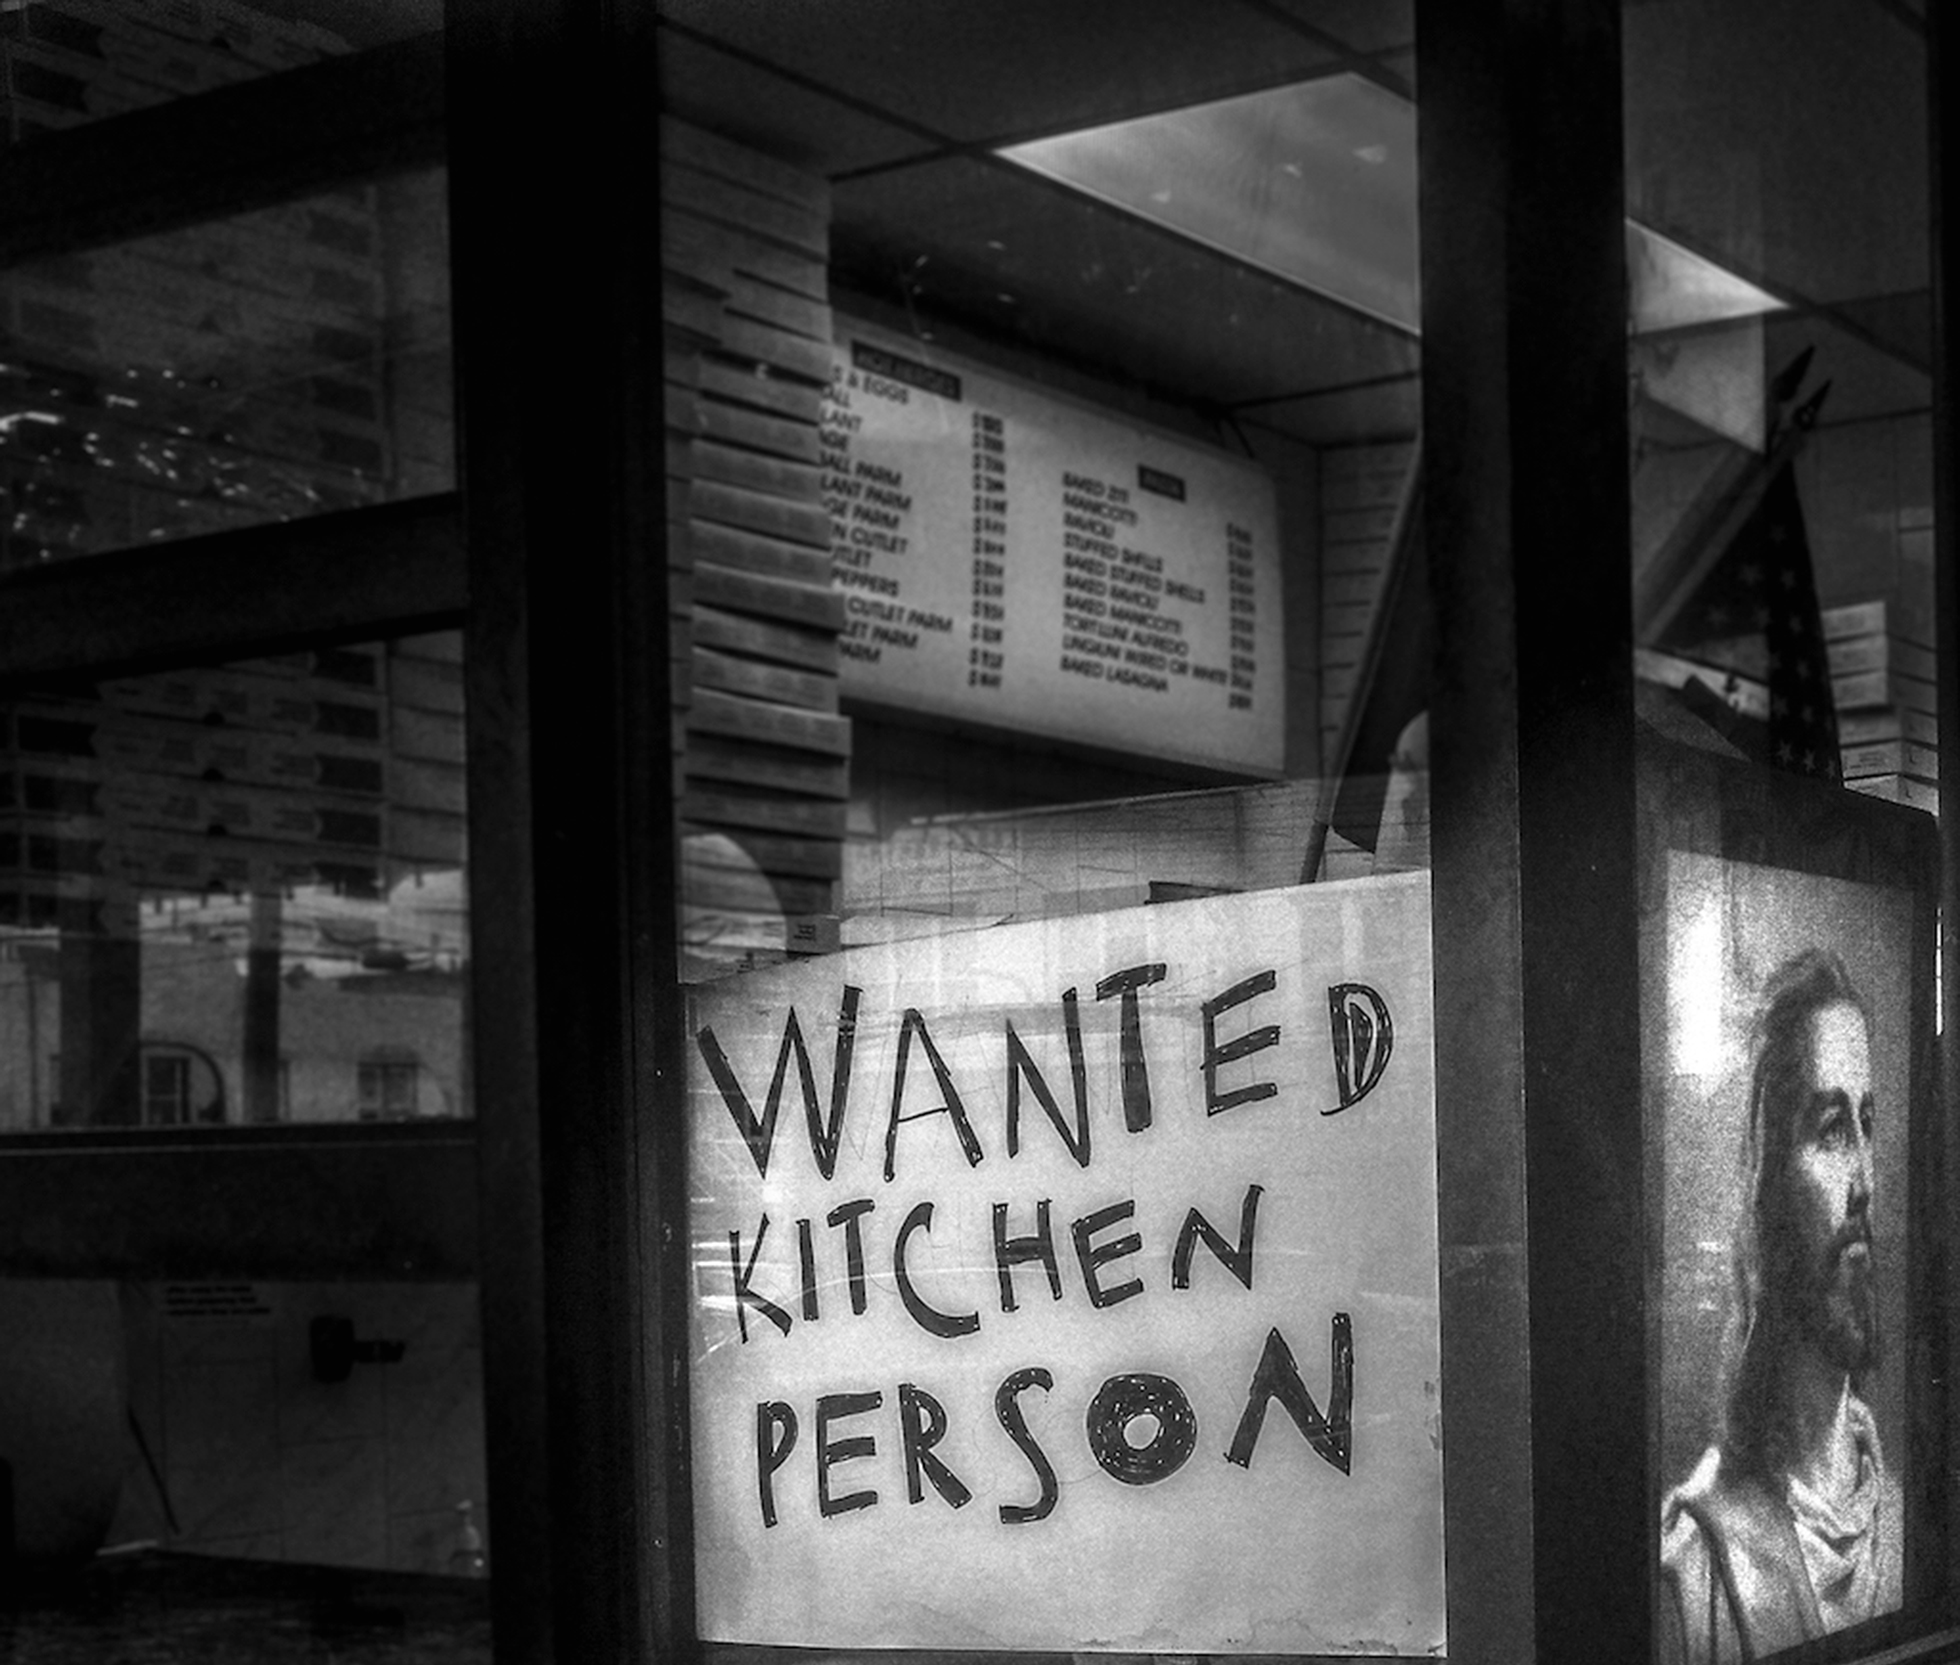 A sign that says Wanted Kitchen Person is placed in a restaurant window. In the window next to it is an image of Jesus Christ.